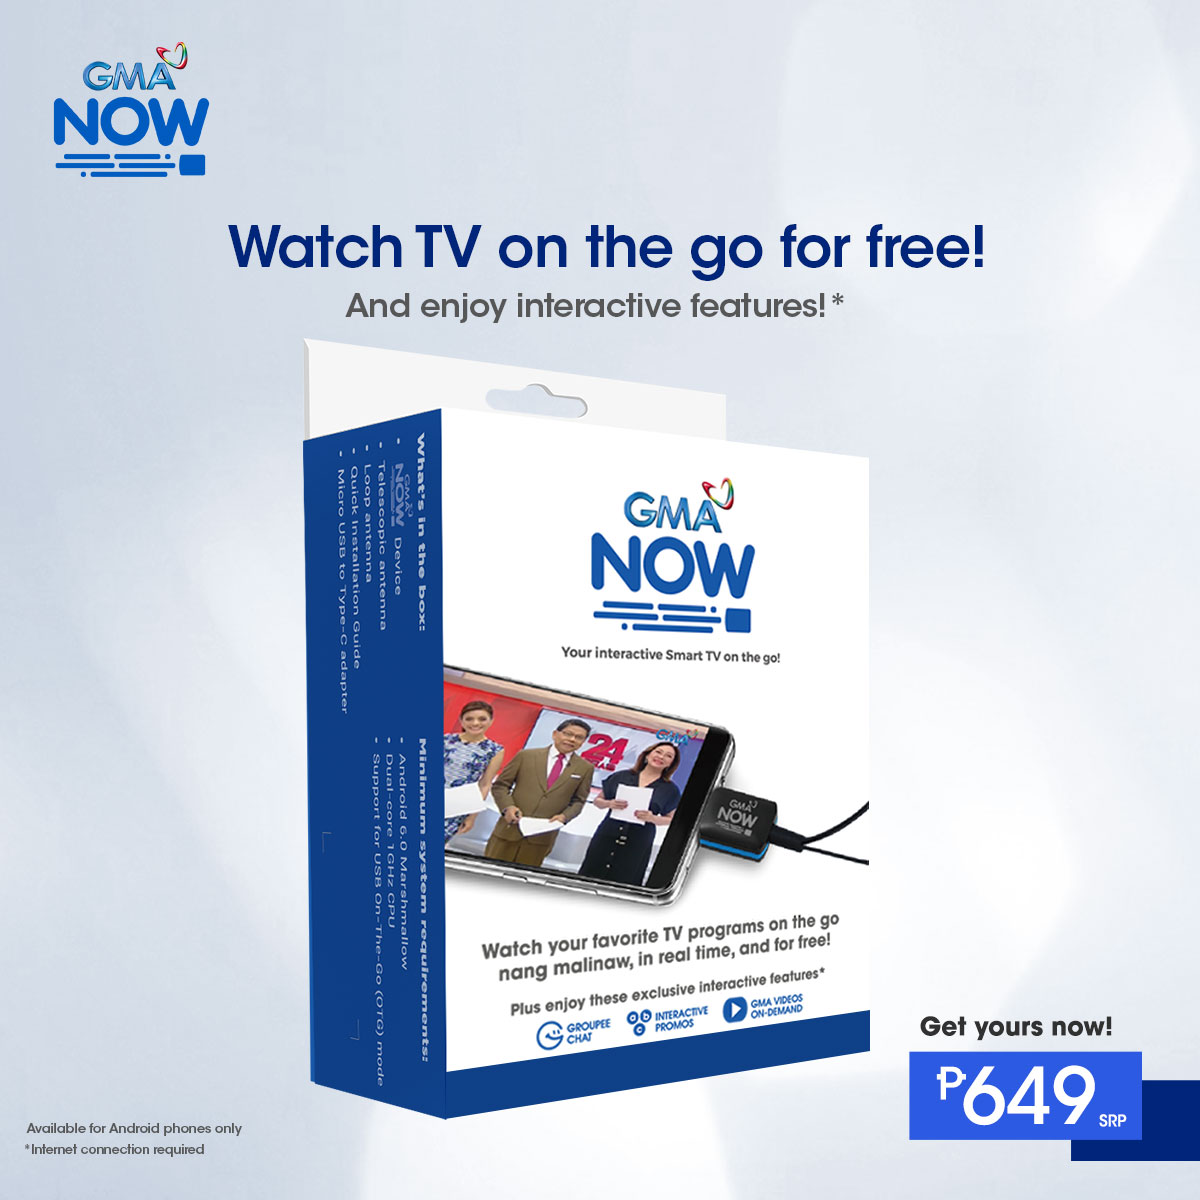 GMA Now -- Watch TV on the go for free